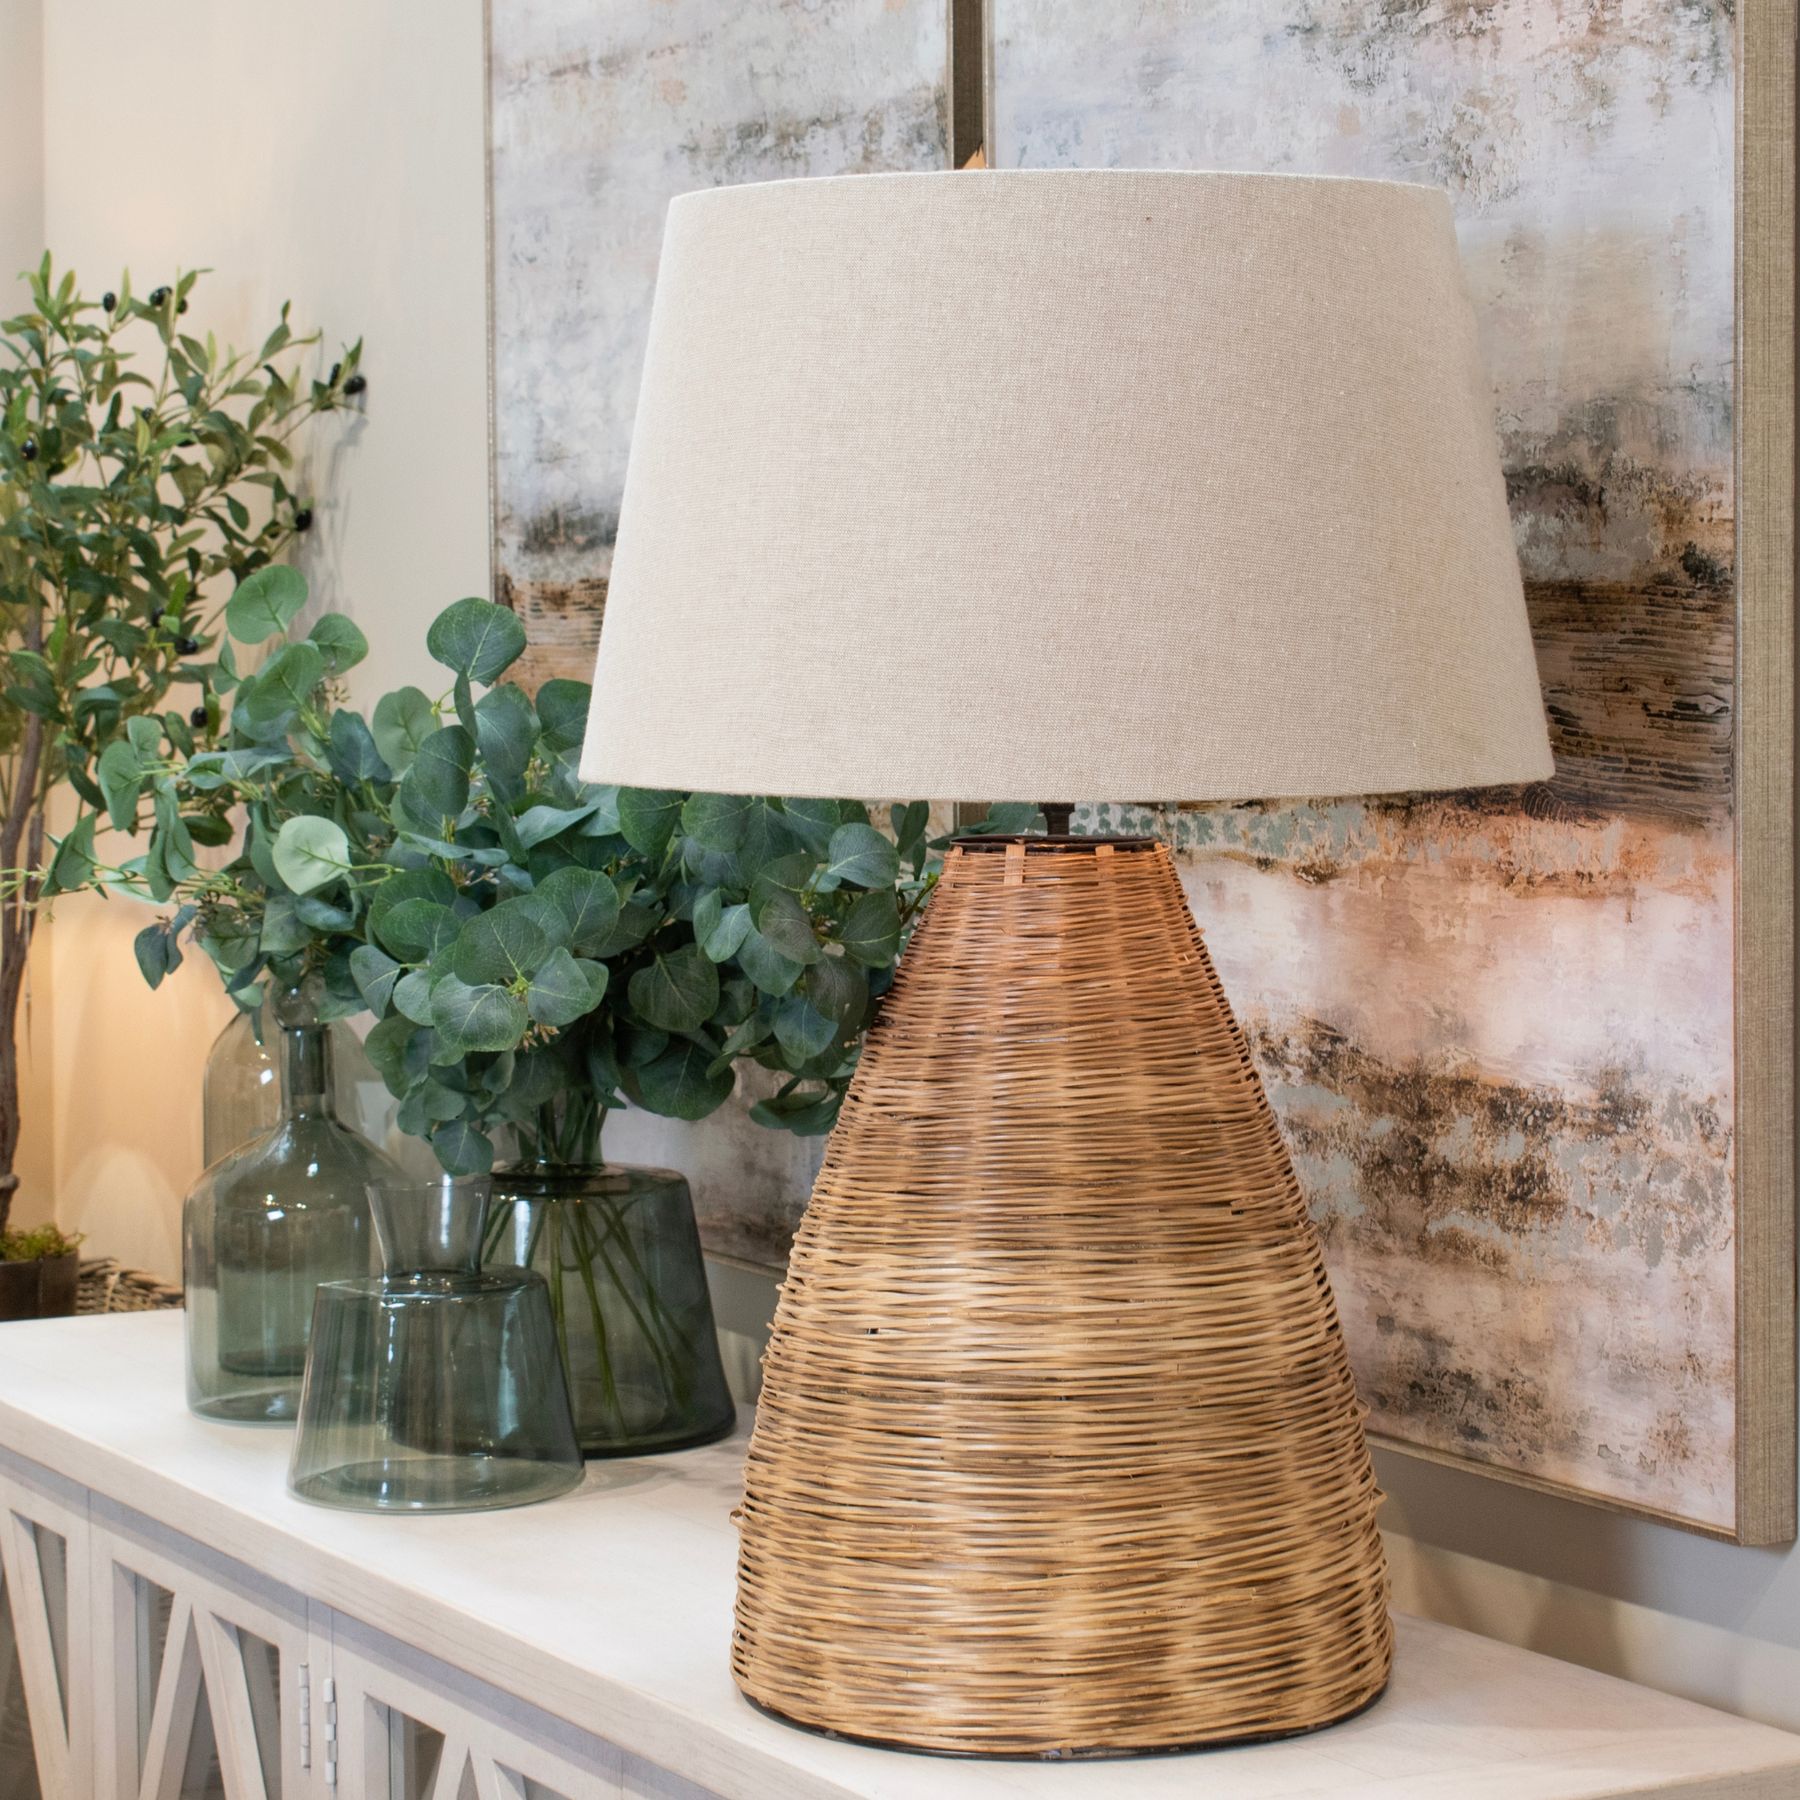 Conical Wicker Table Lamp With Linen Shade - Image 6